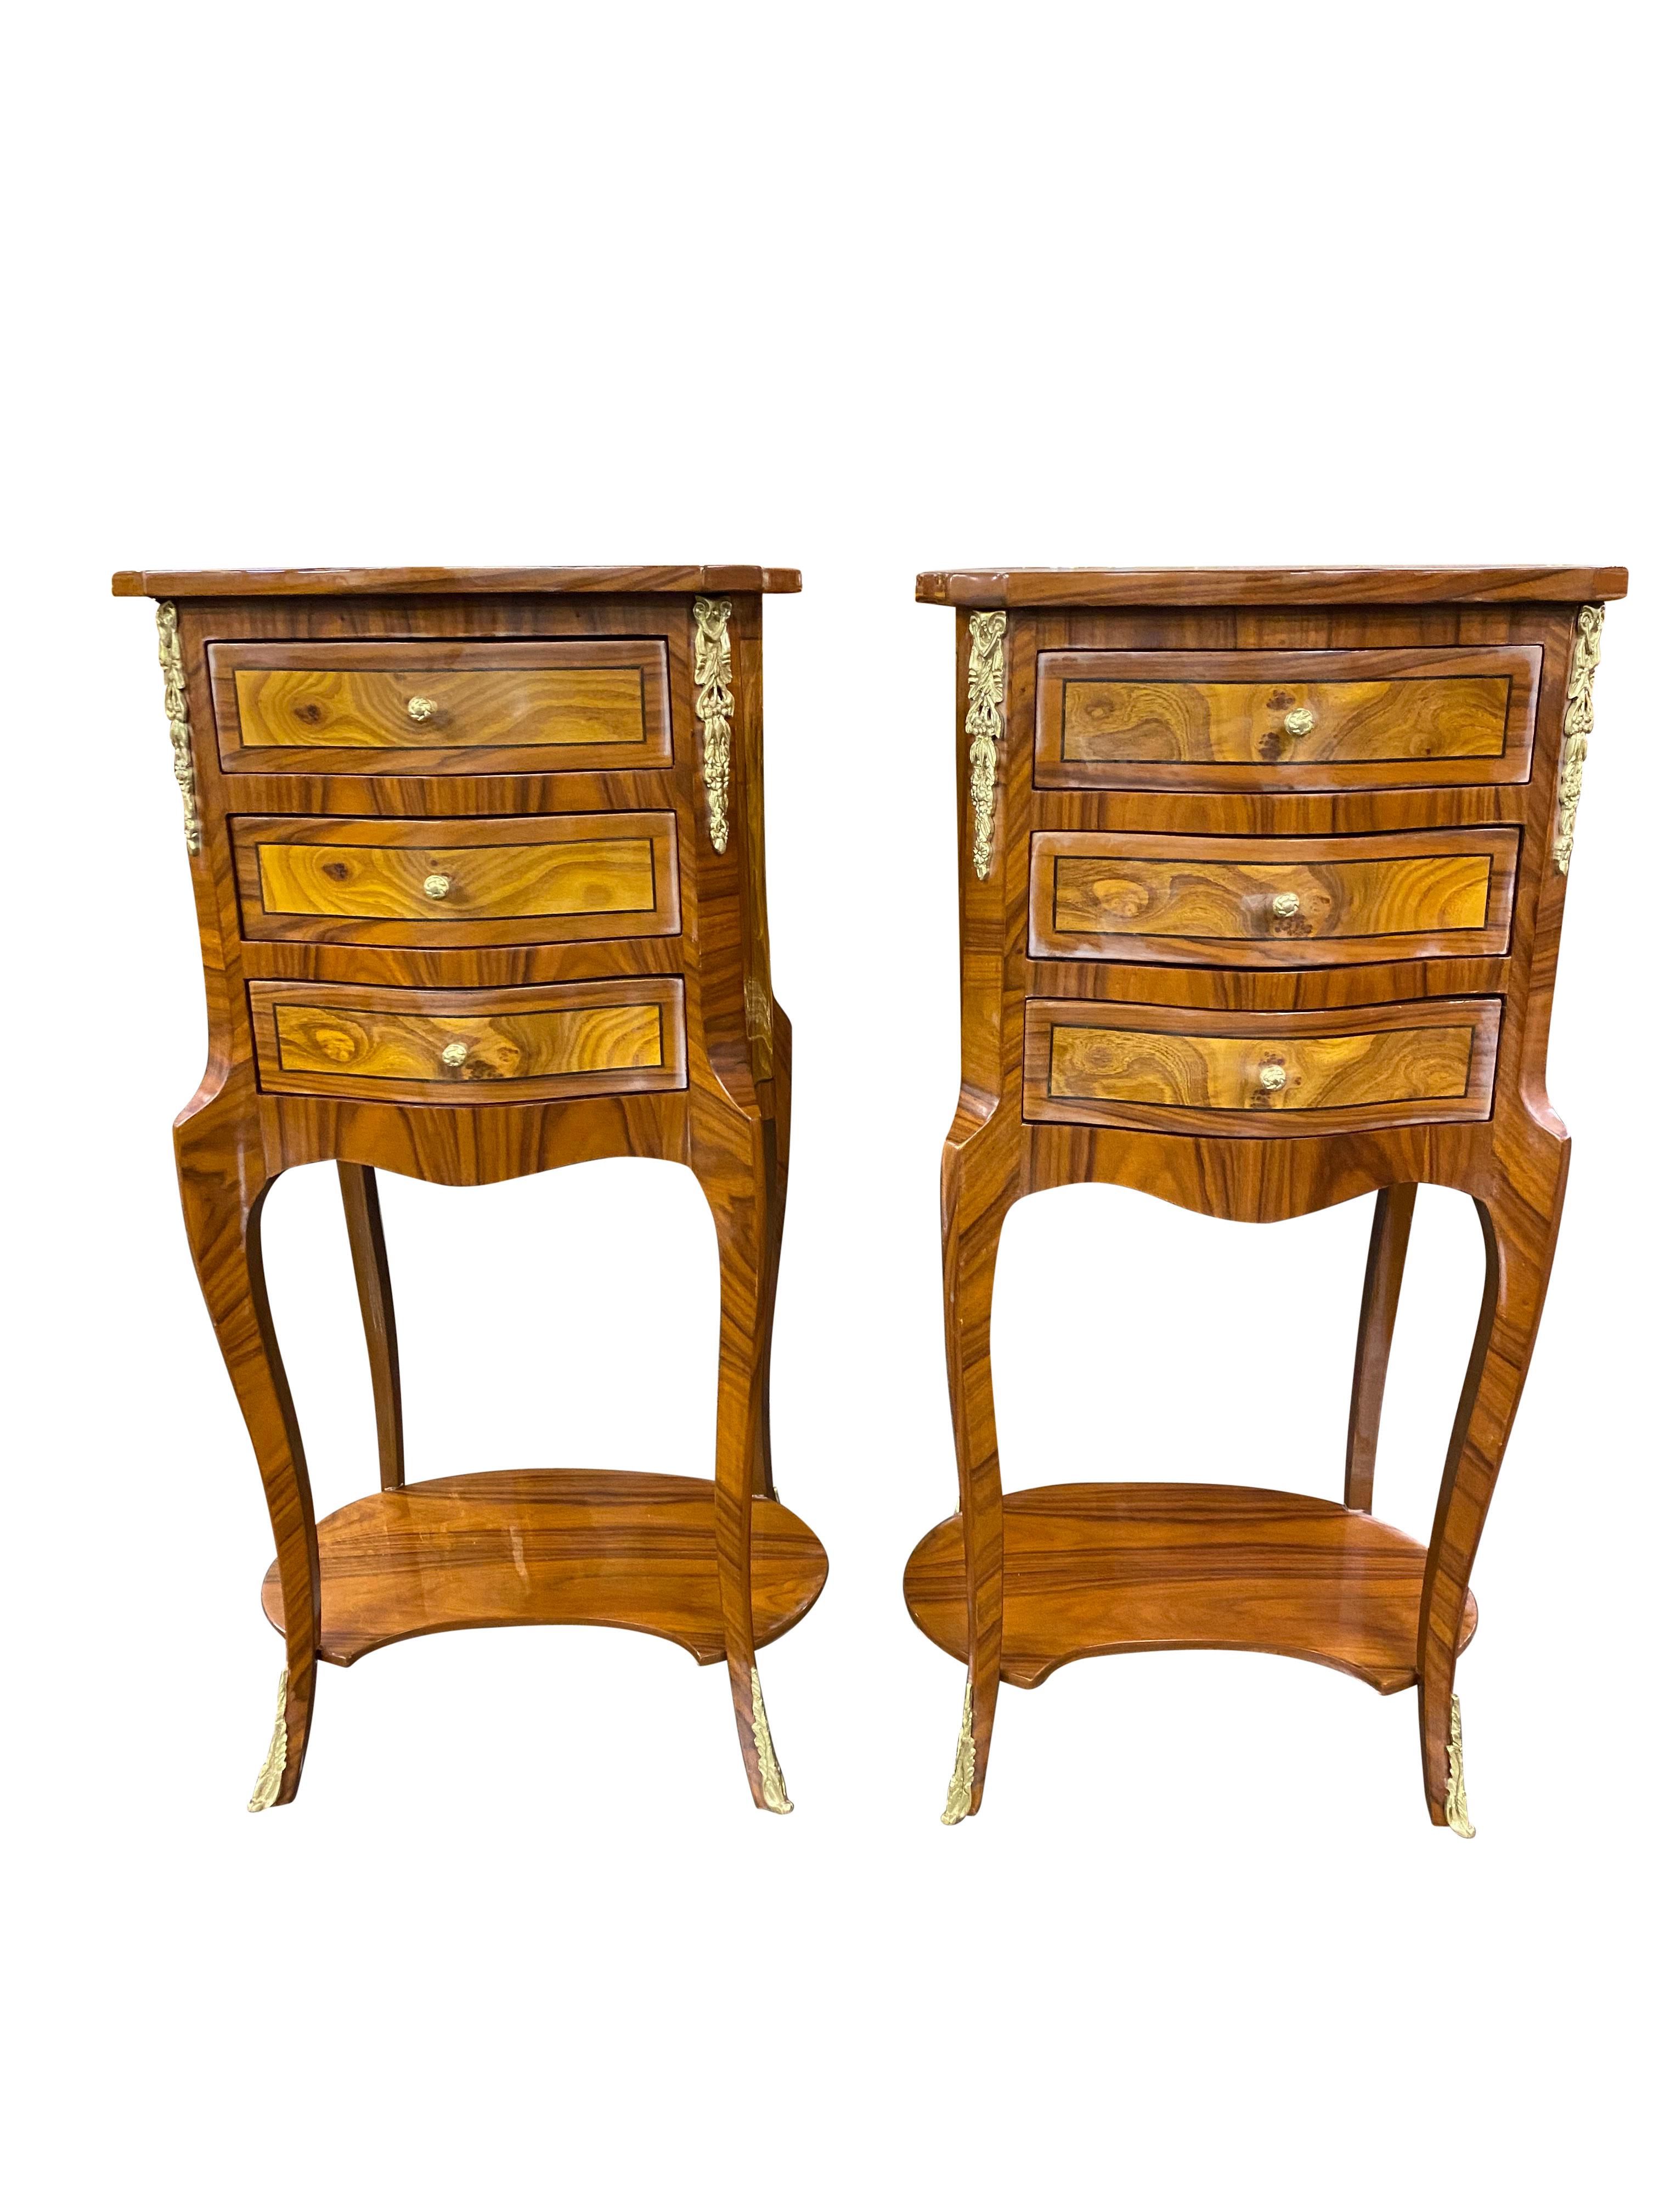 A stunning pair of 20th Century English Regency style side tables. A gorgeous and elegant design perfect for modern interiors.